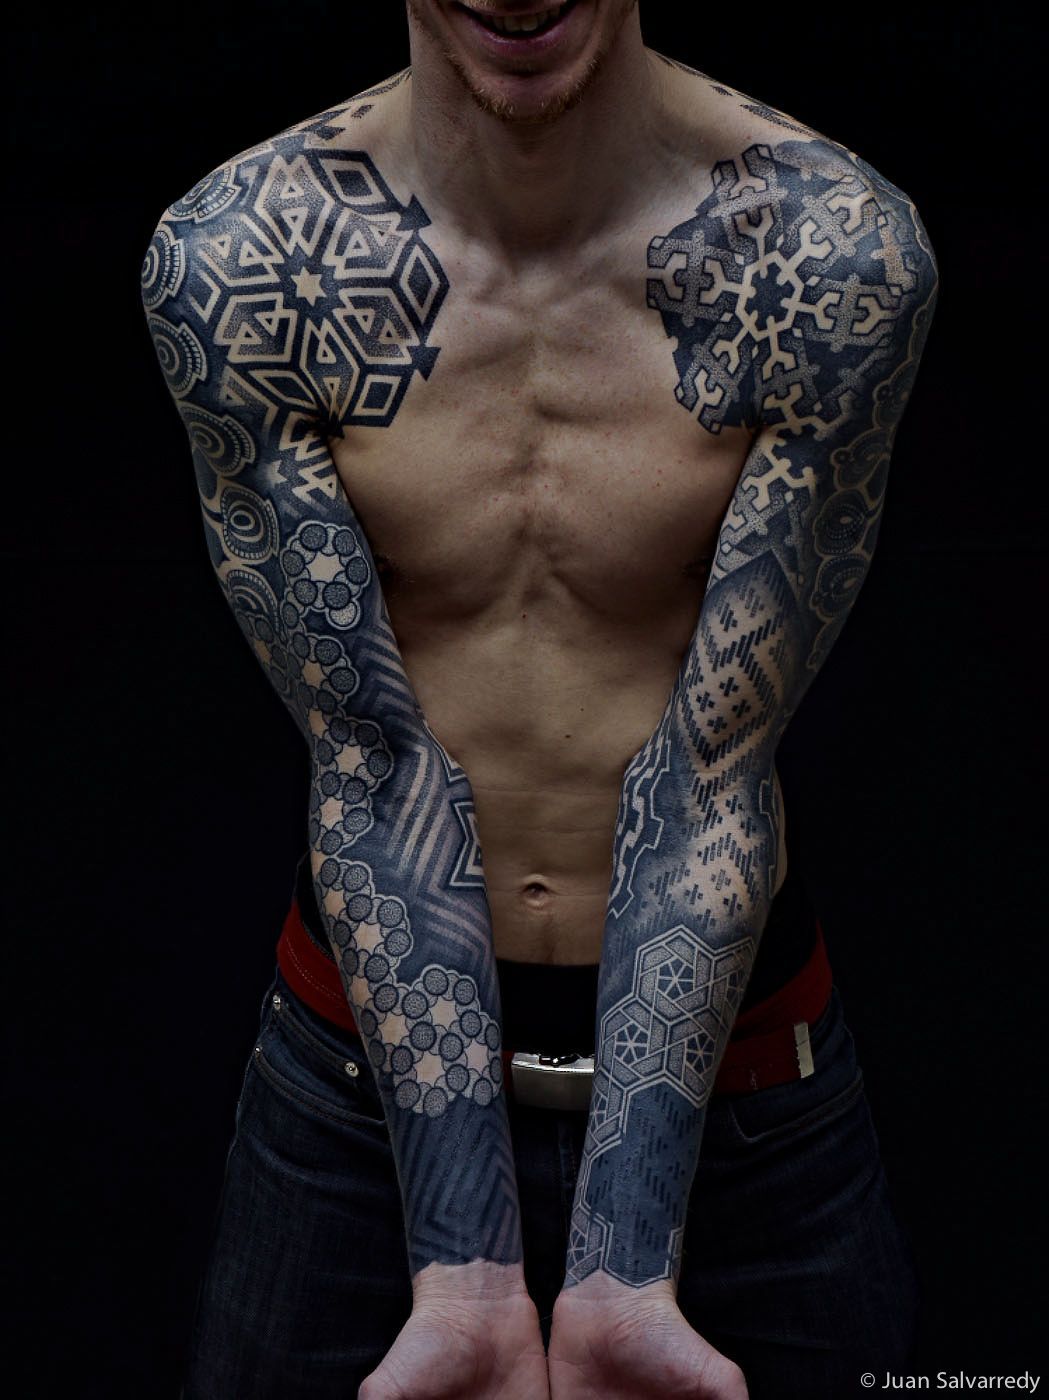 _ Pointillism tattoo by Nazareno Tubaro – This is a beautiful two sleeve tattoo